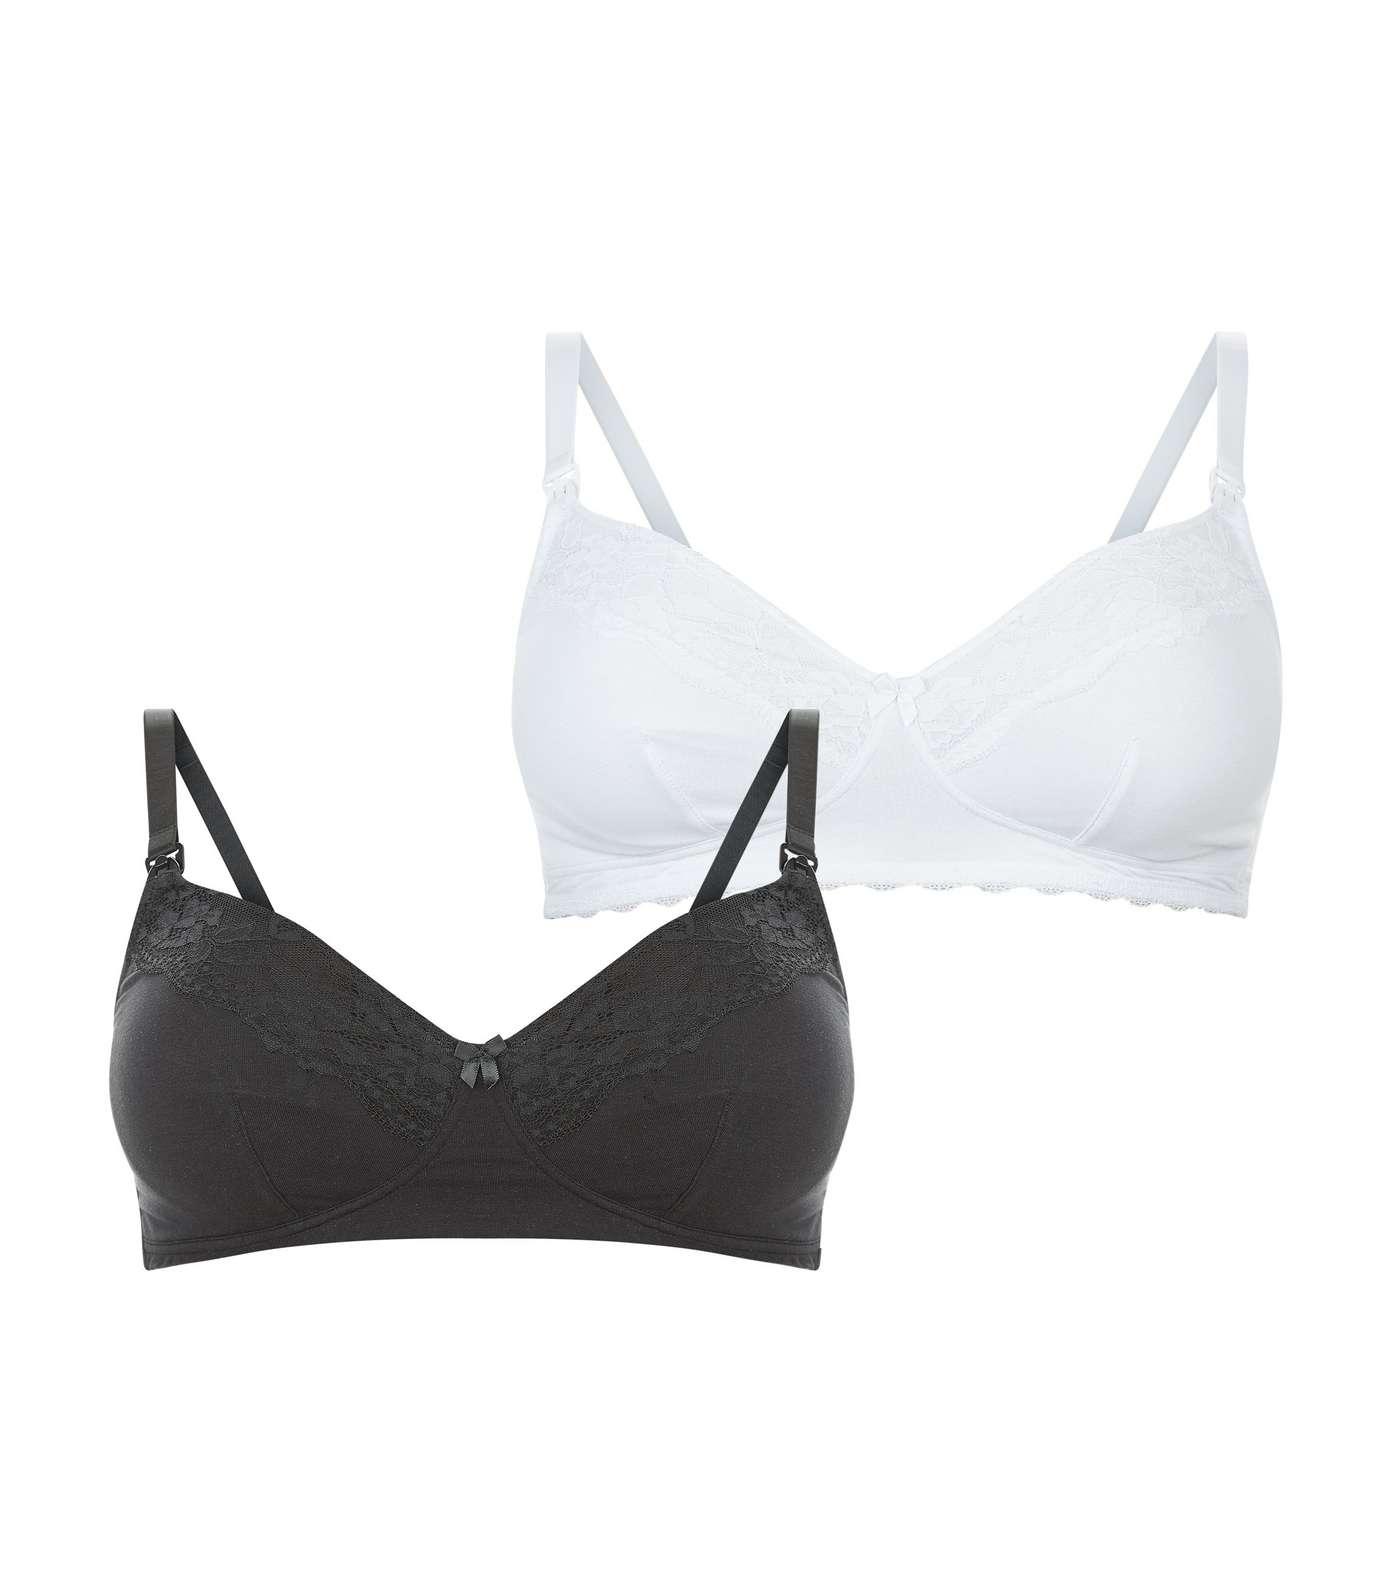 Maternity 2 Pack Black and White Soft Cup Nursing Bras